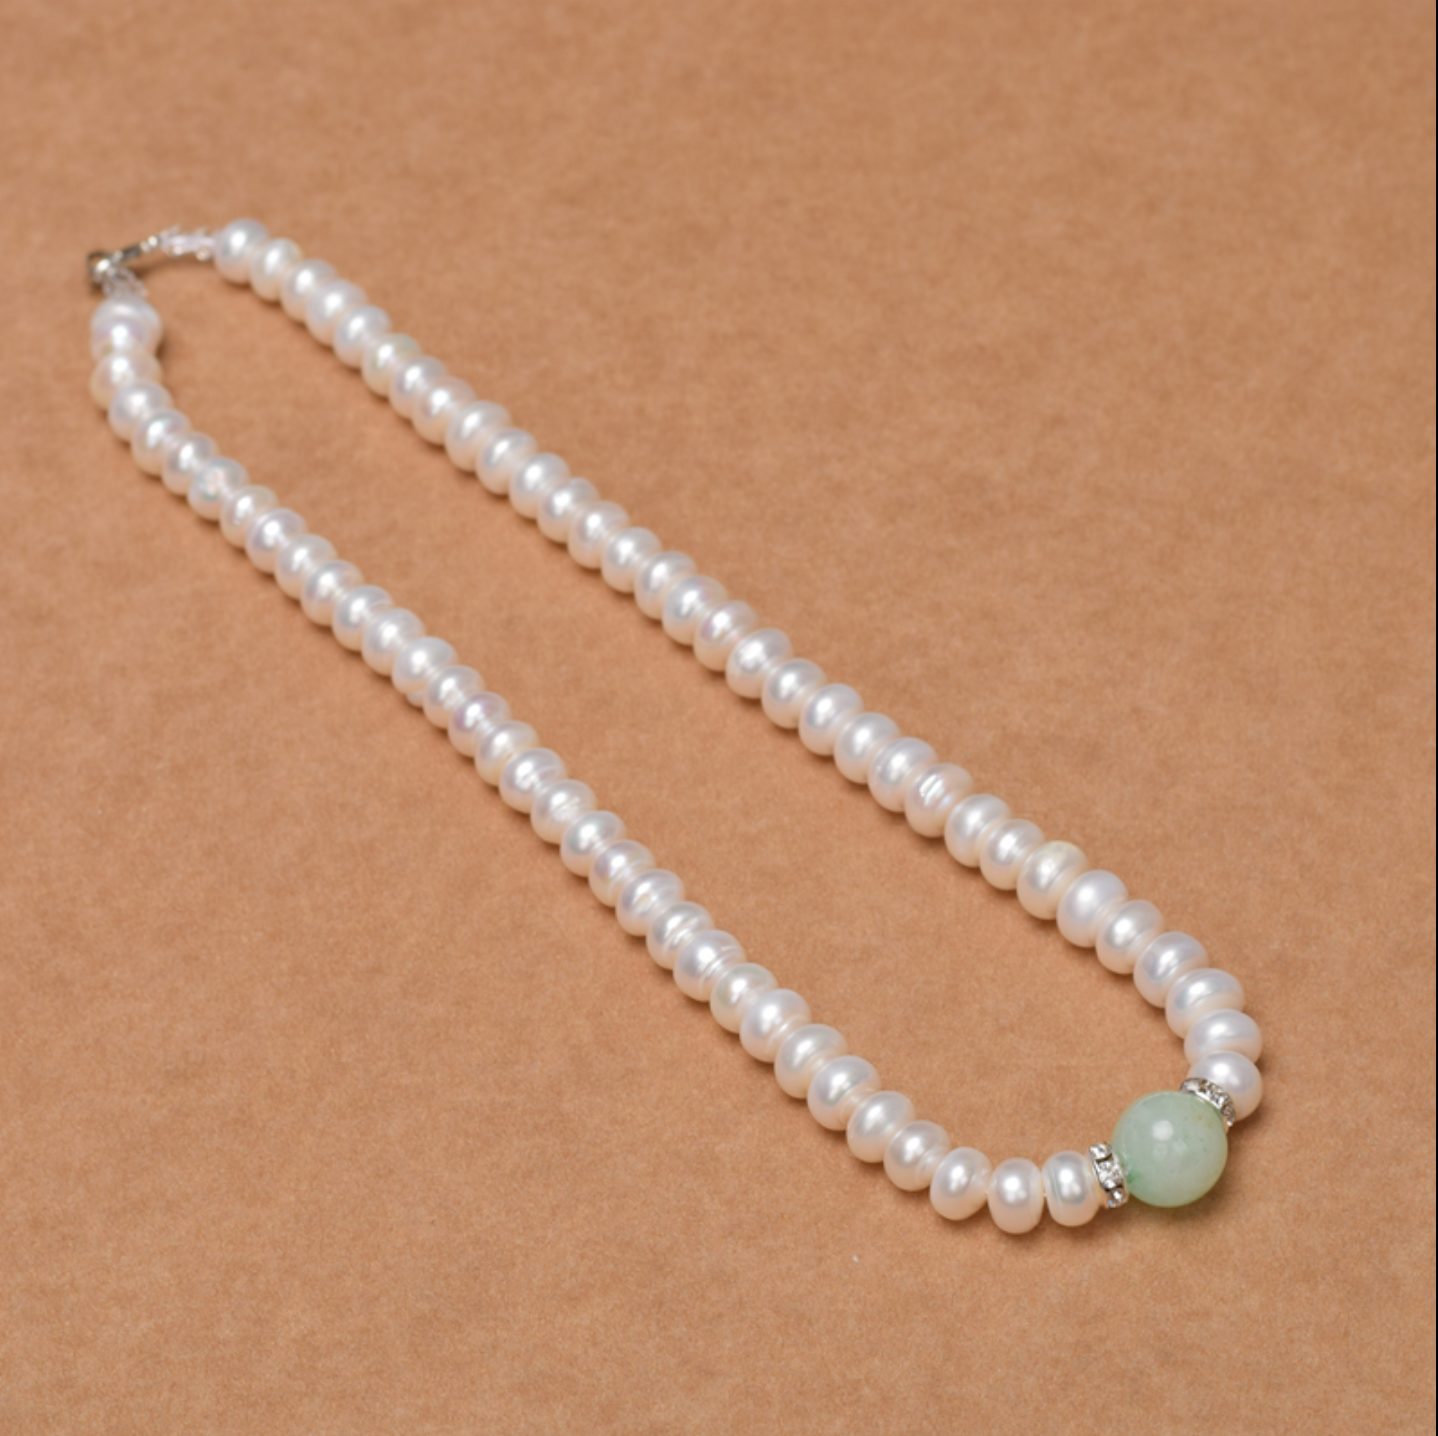 Pearl necklace plump white natural